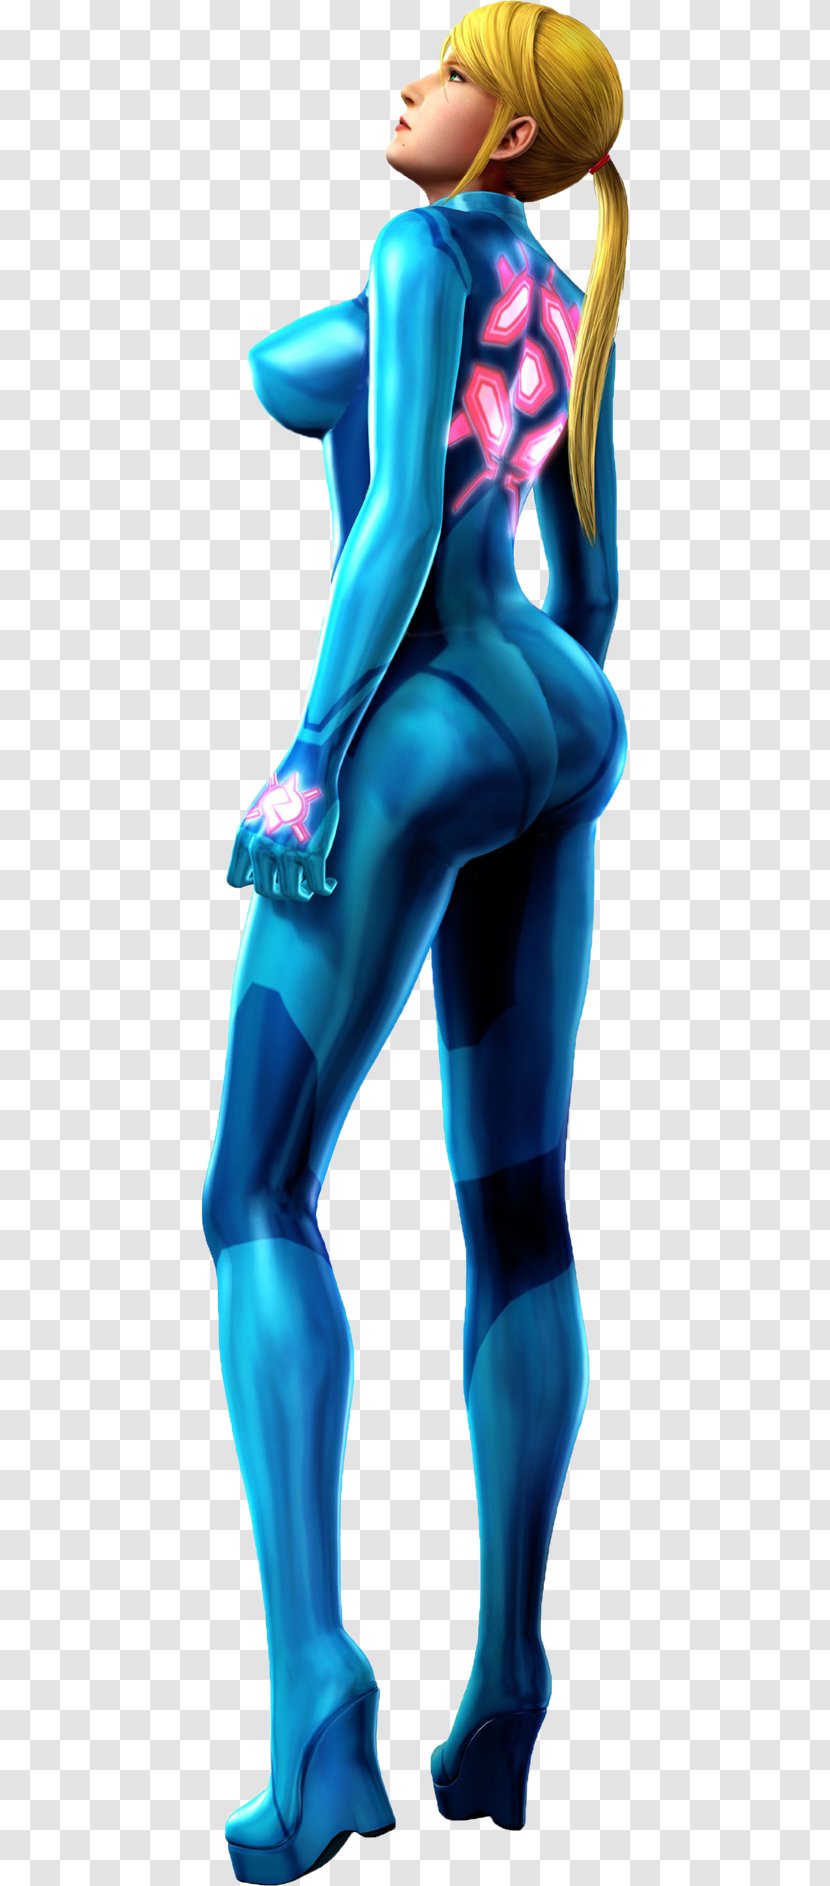 Metroid: Other M Zero Mission Super Smash Bros. Brawl For Nintendo 3DS And Wii U - Metroid - Pant Transparent PNG